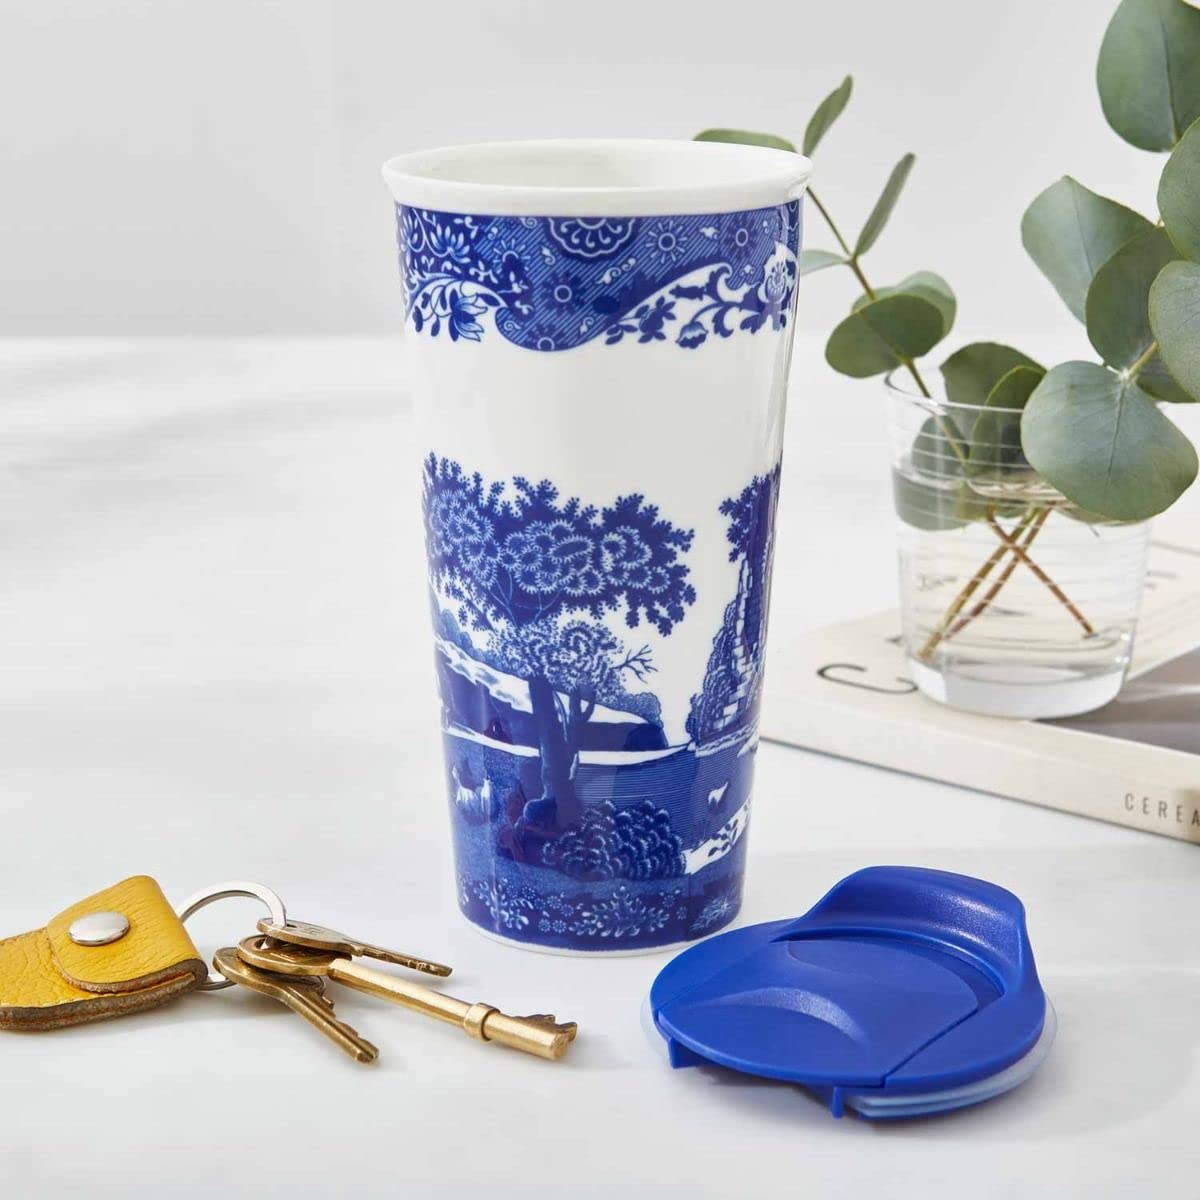 Spode Blue Italian Travel Mug | Made of Porcelain | Travel Tumbler for Coffee and Tea | Hot Water Cup | Dishwasher and Microwave Safe (12 oz)